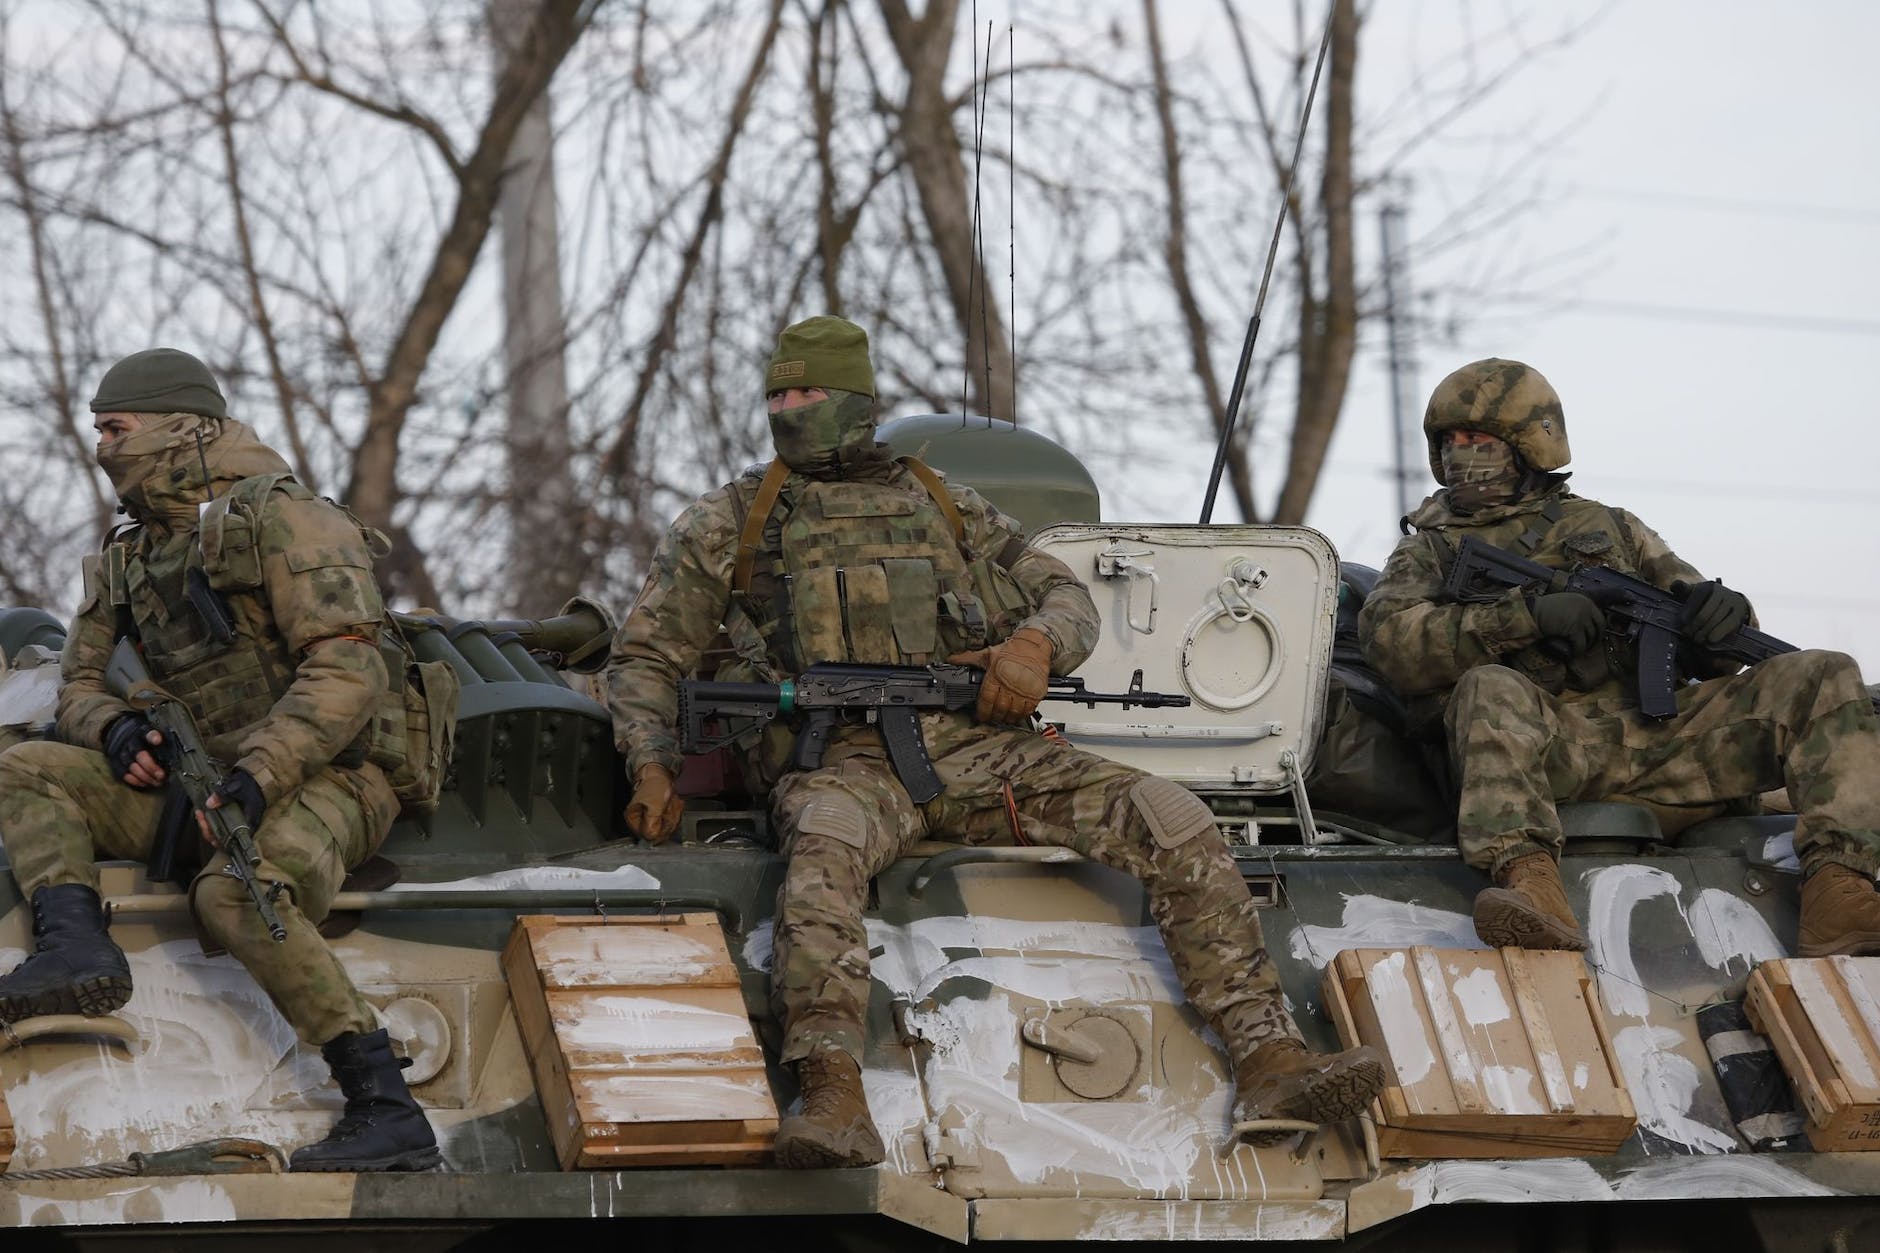 Russian soldiers secure the border with Ukraine near Belgorod.